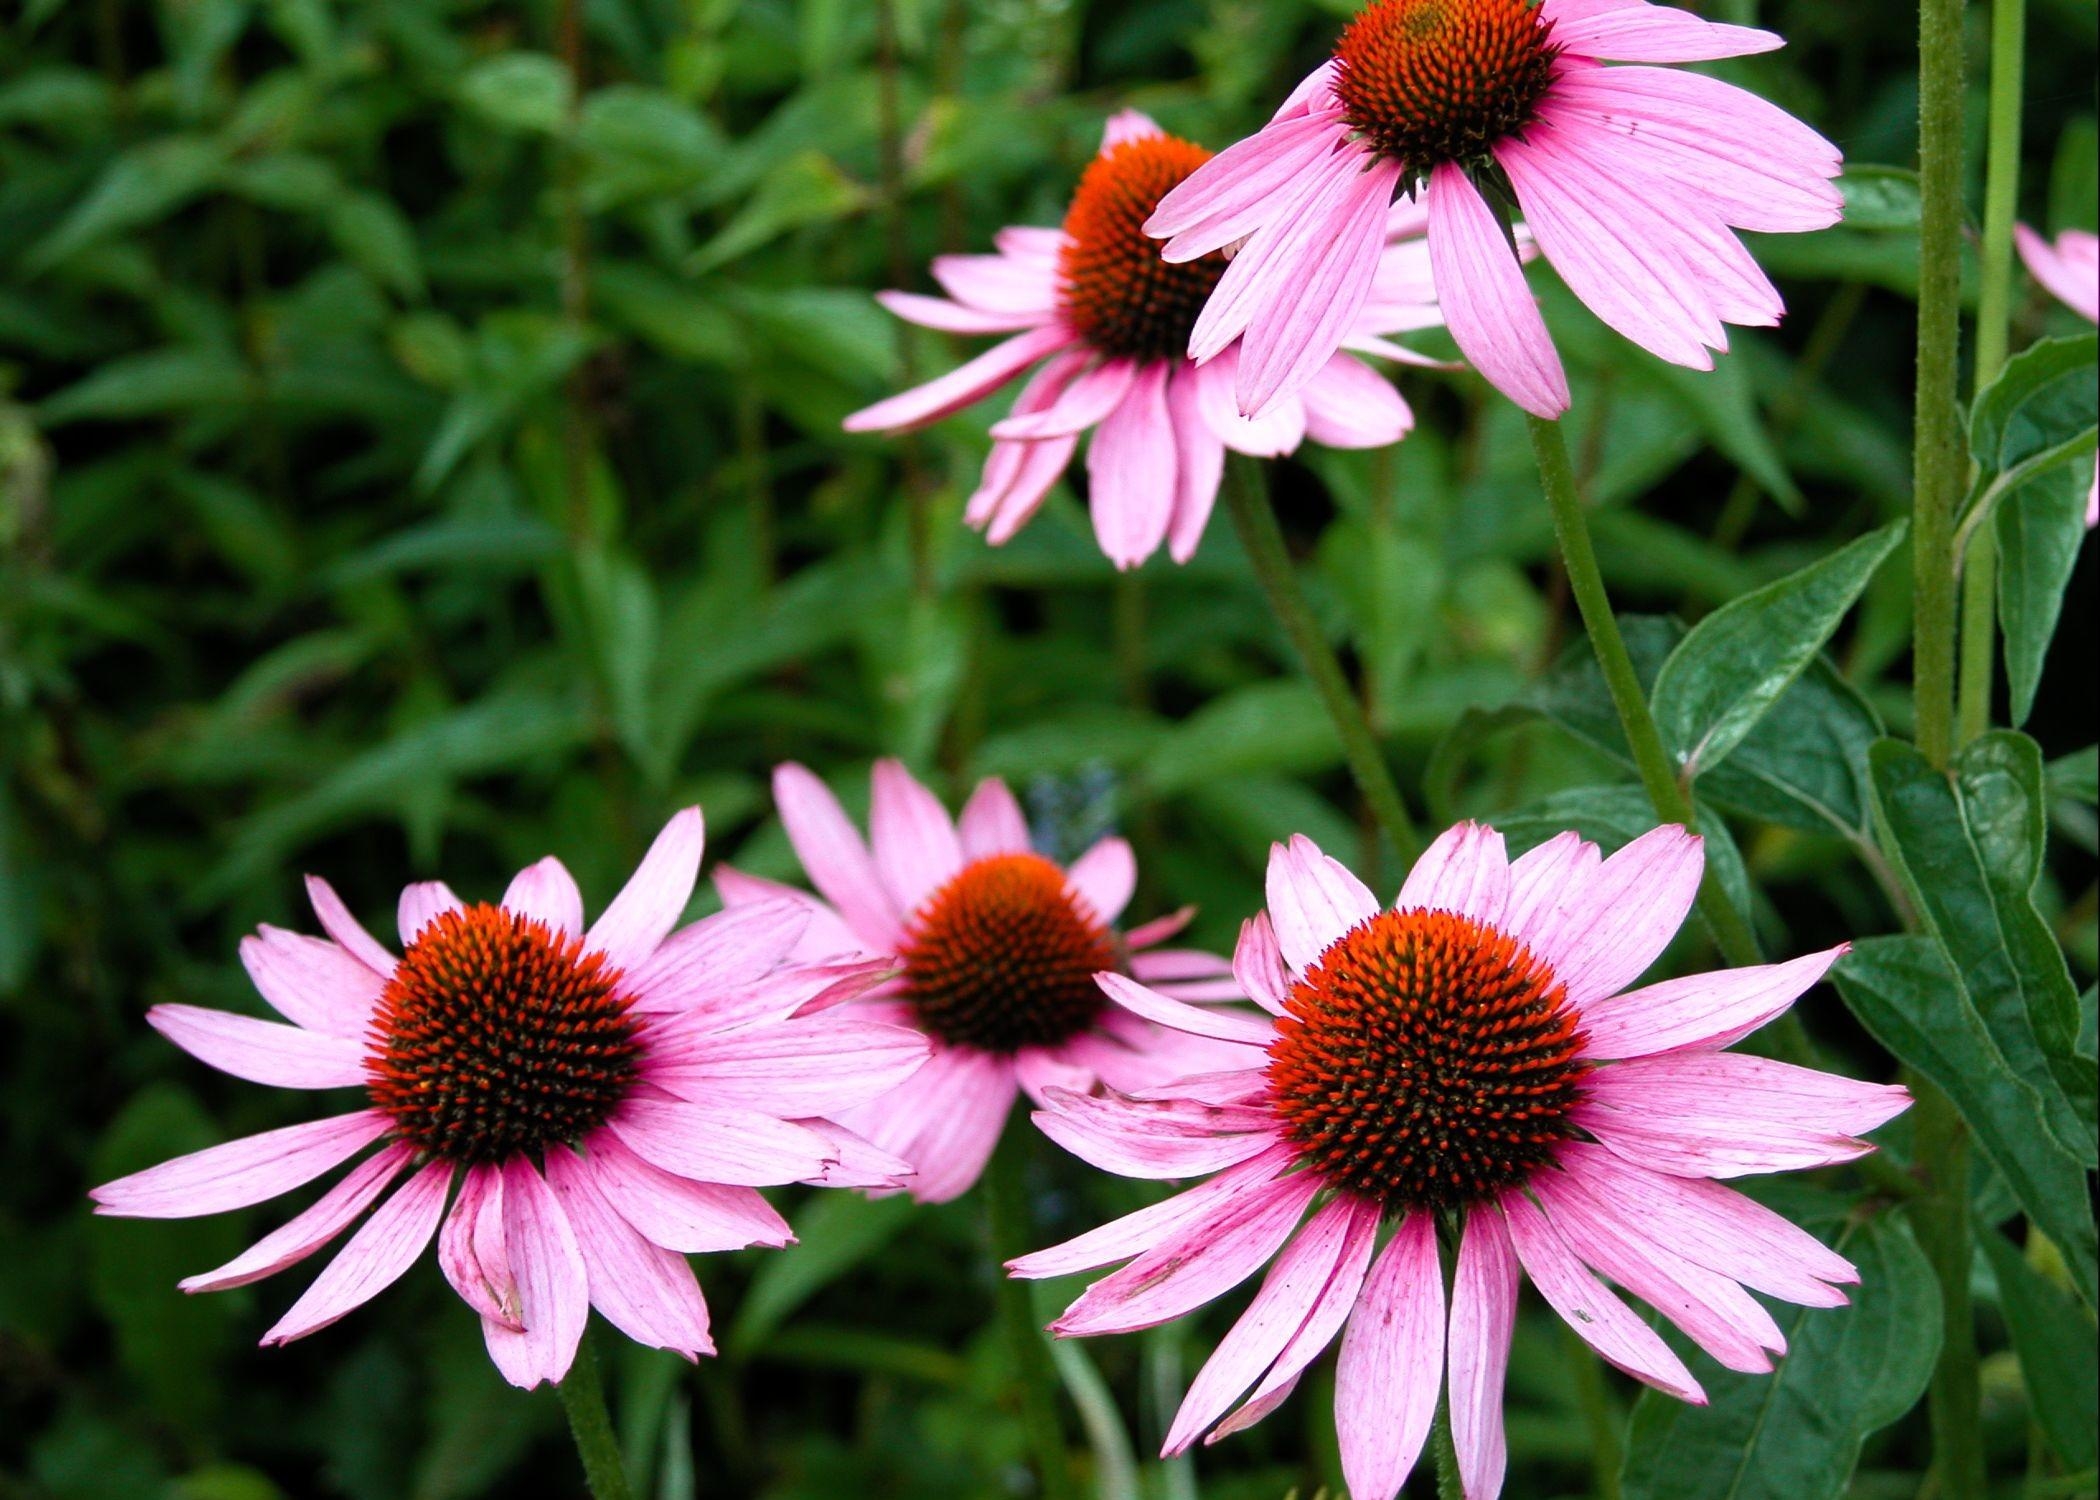 flower bed, flowers, close up, greens, flowerbed, echinacea